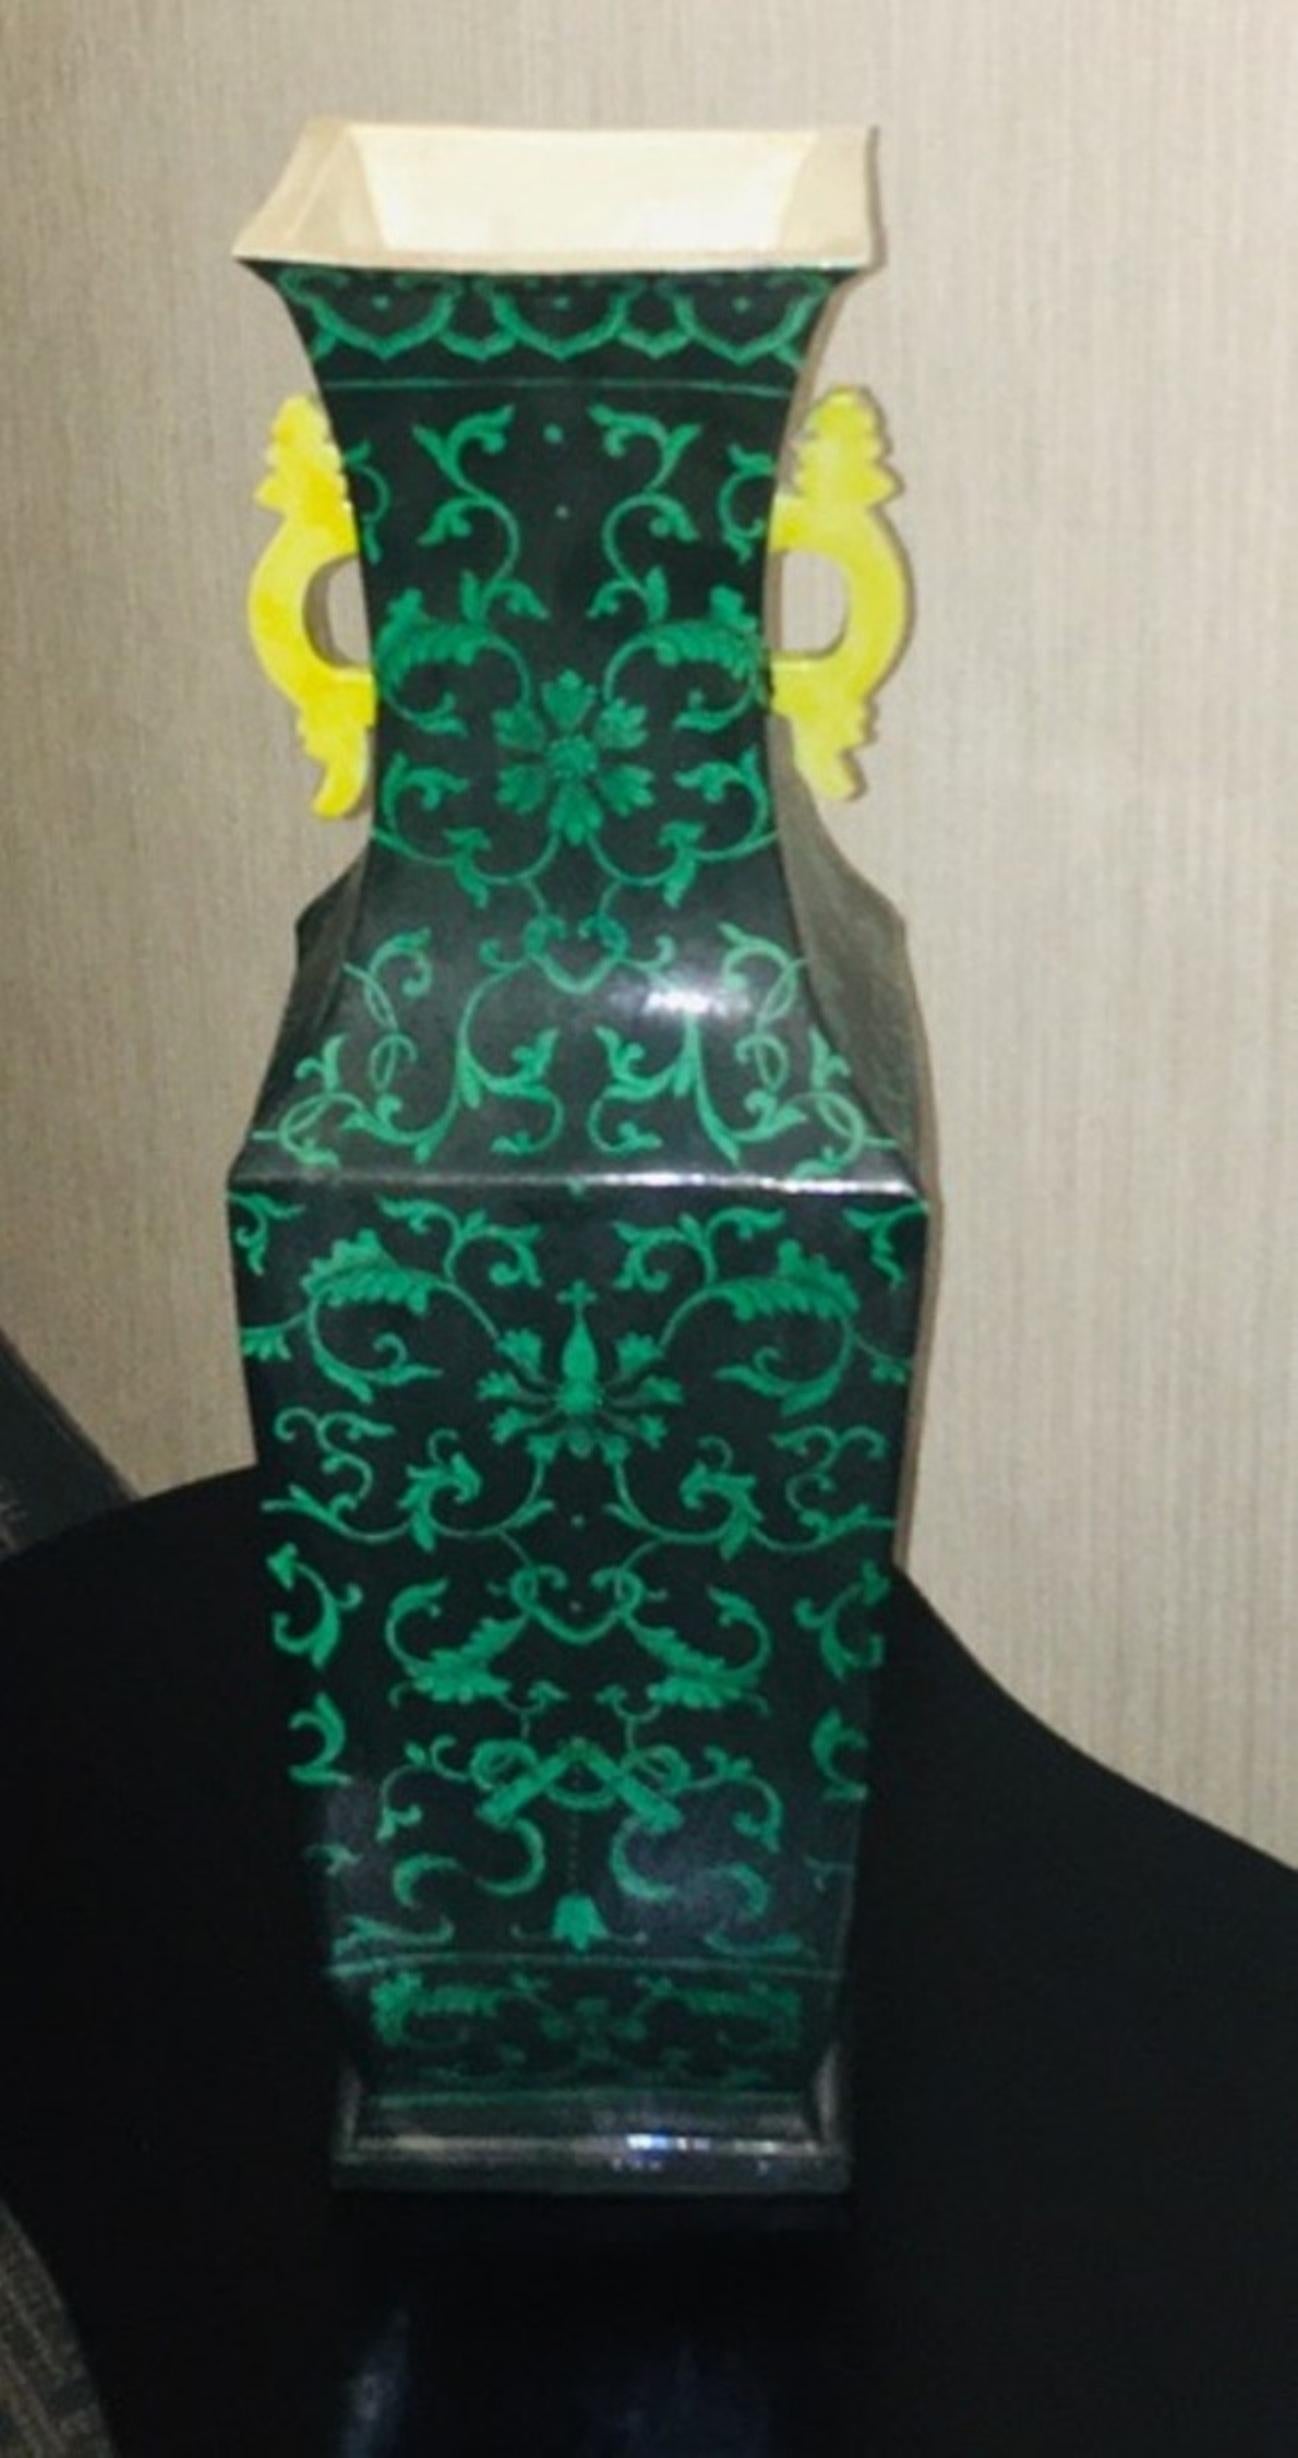 Chinese Qing dynasty Jiaqing period porcelain vase with green glazed floral elements and scroll designs on a rich black glaze ground. Featuring bright yellow dragon handles and a wonderful unusual square shape. Made in China during the Qing dynasty,